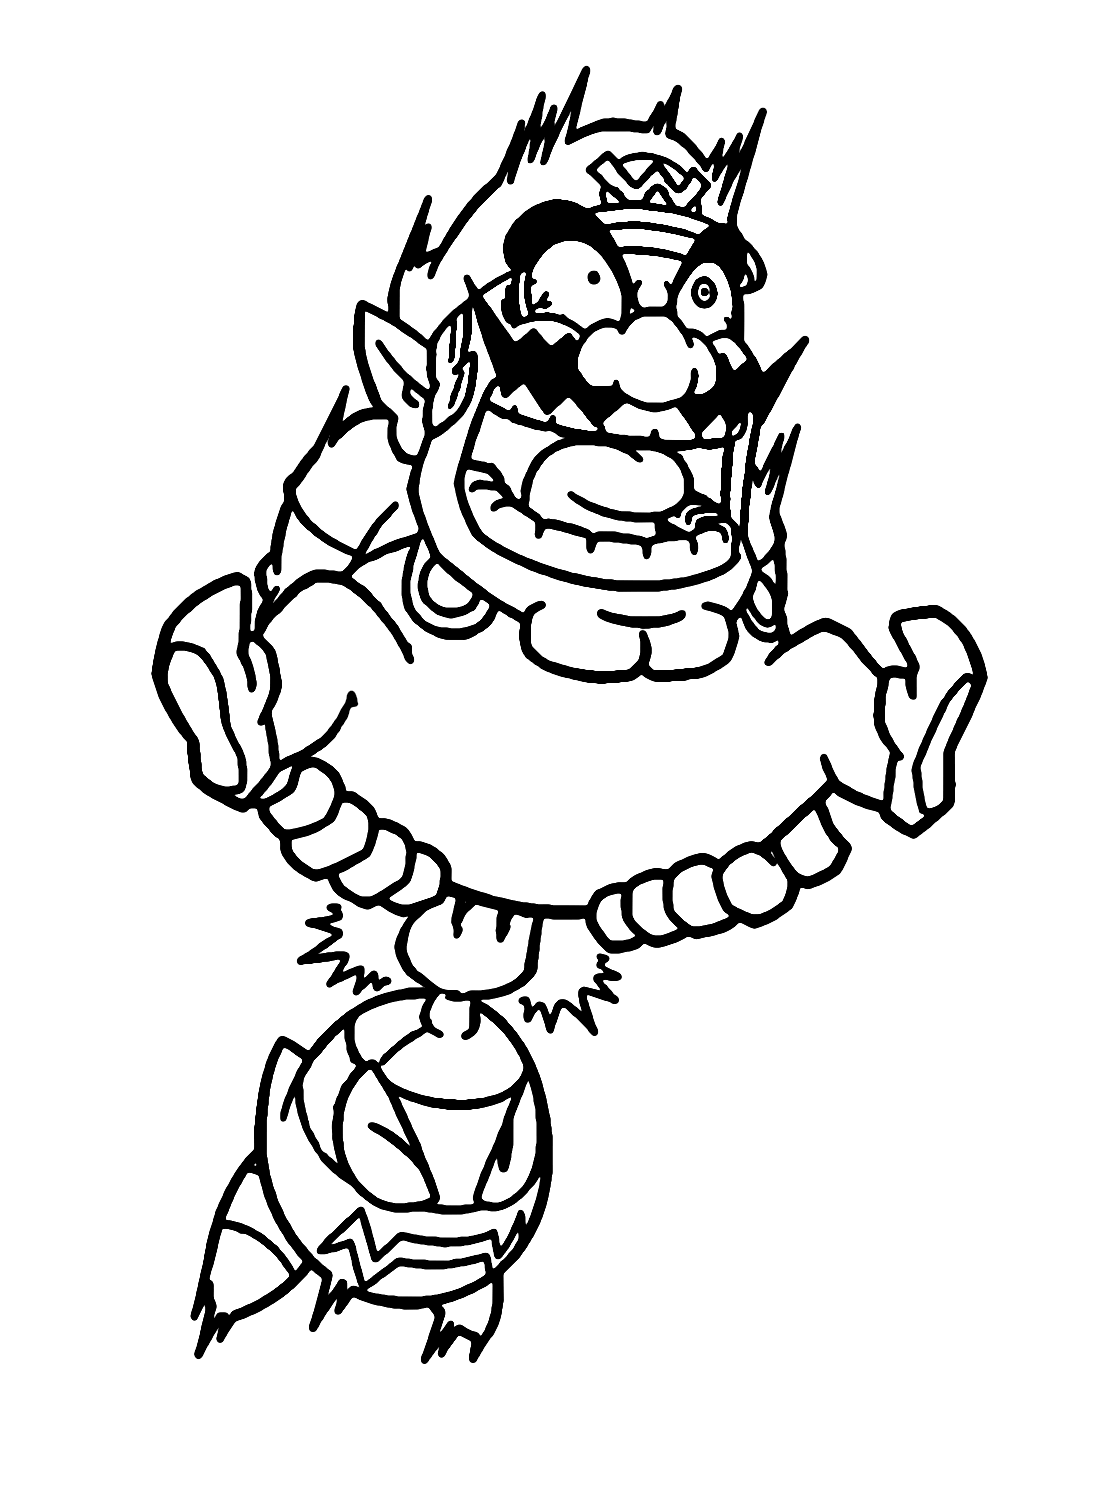 Funny Wario for Kids Coloring Pages